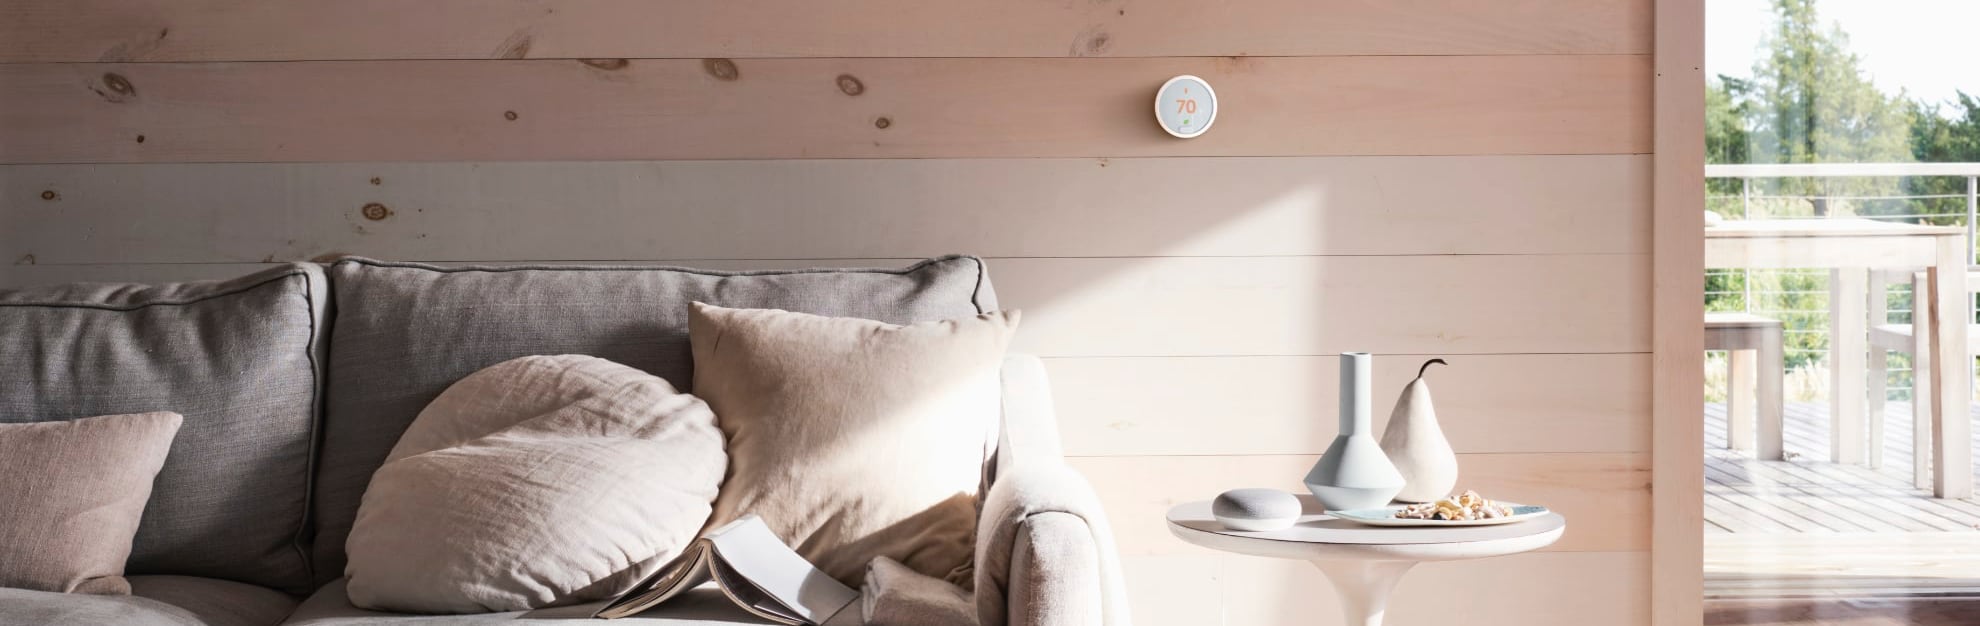 Vivint Home Automation in New York City